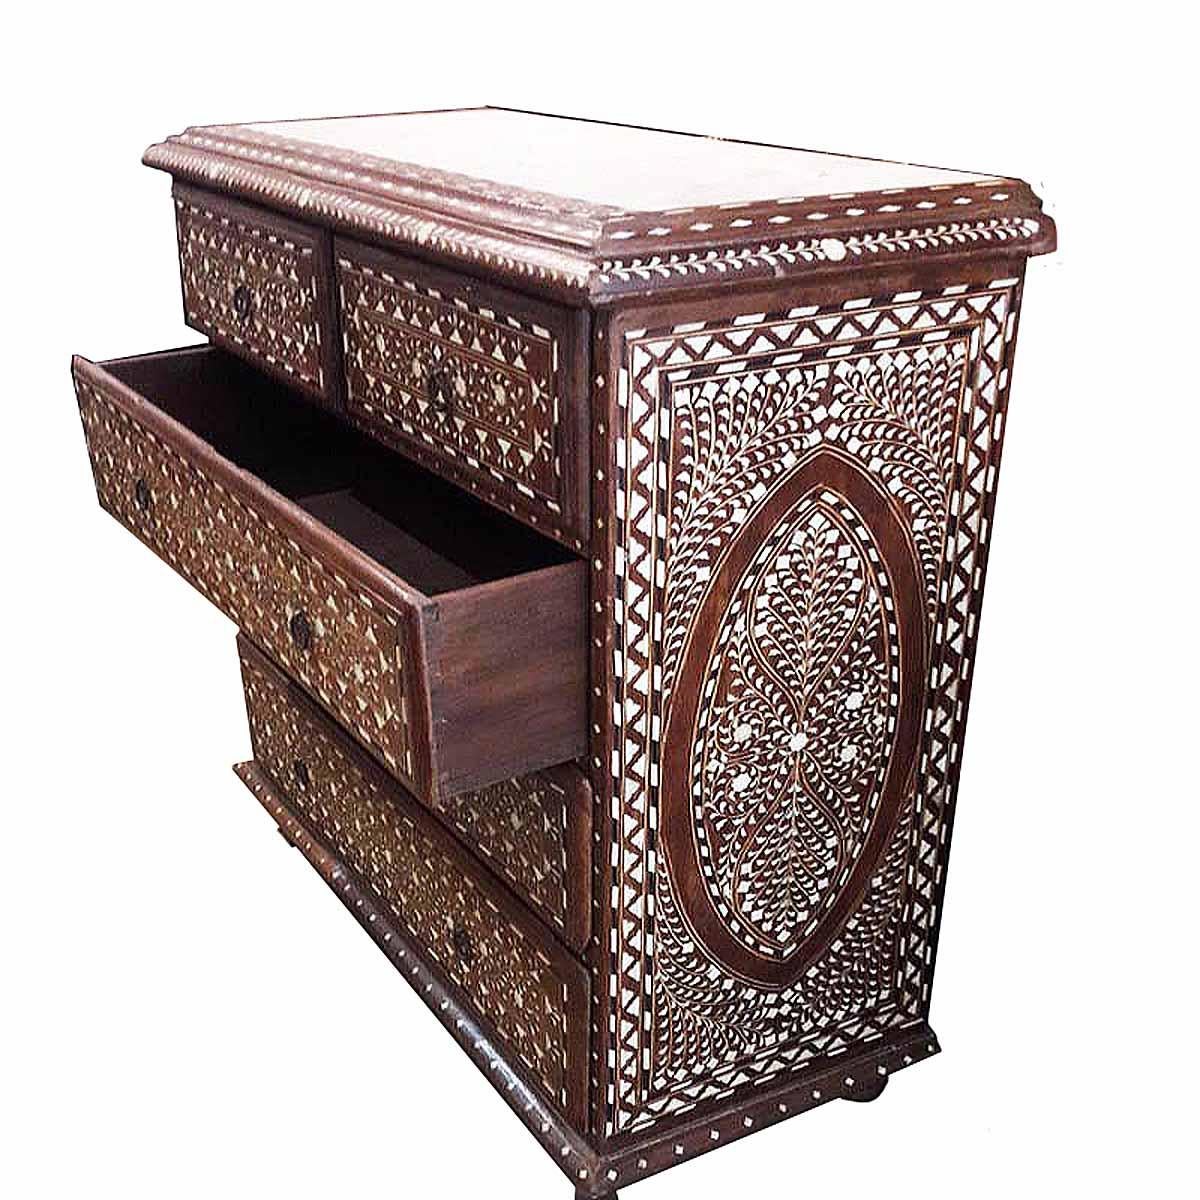 Anglo-Indian Bone-Inlaid Teak Chest of Drawers with Marble Top from India